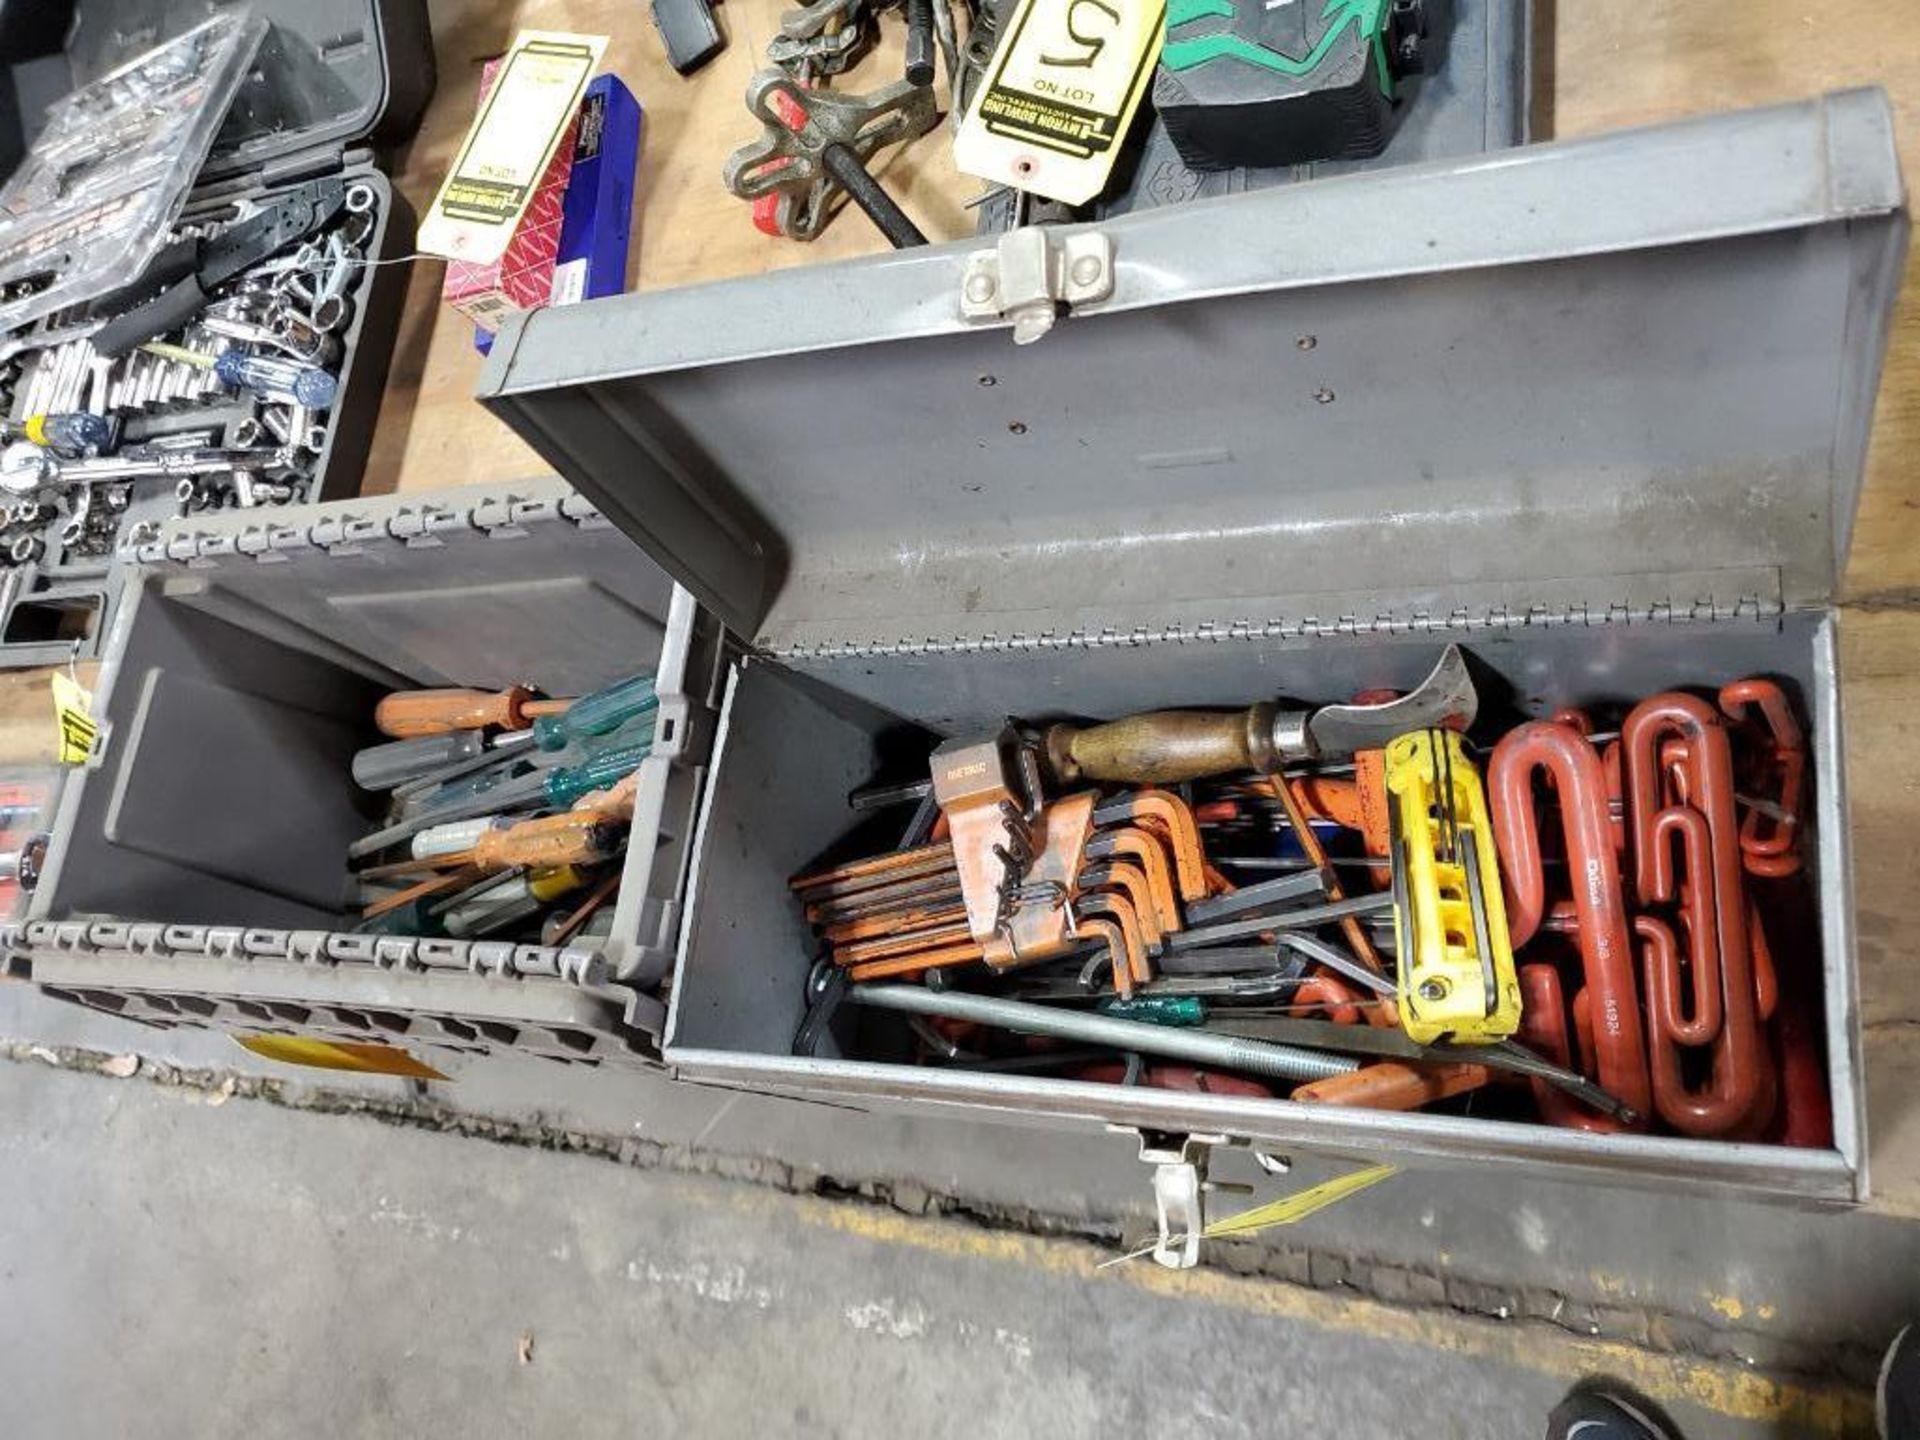 Toolbox & Containers Of Allen Wrenches, Allen Screw Drivers, Handle Wrenches, & Assorted